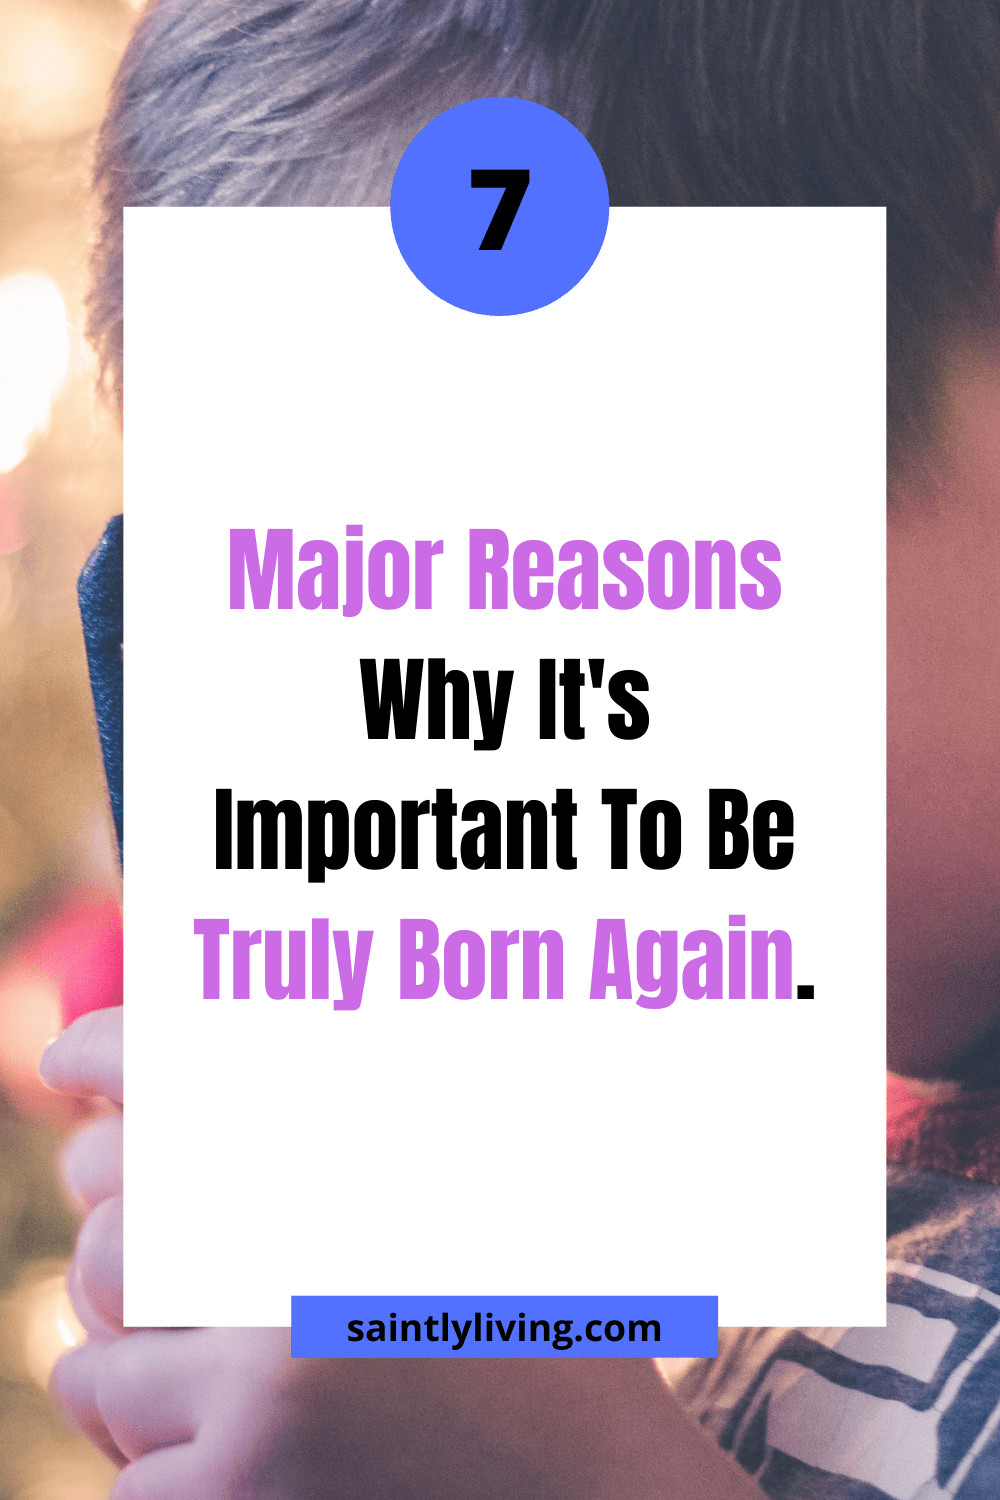 reasons-why-its-important-to-be-born-again.